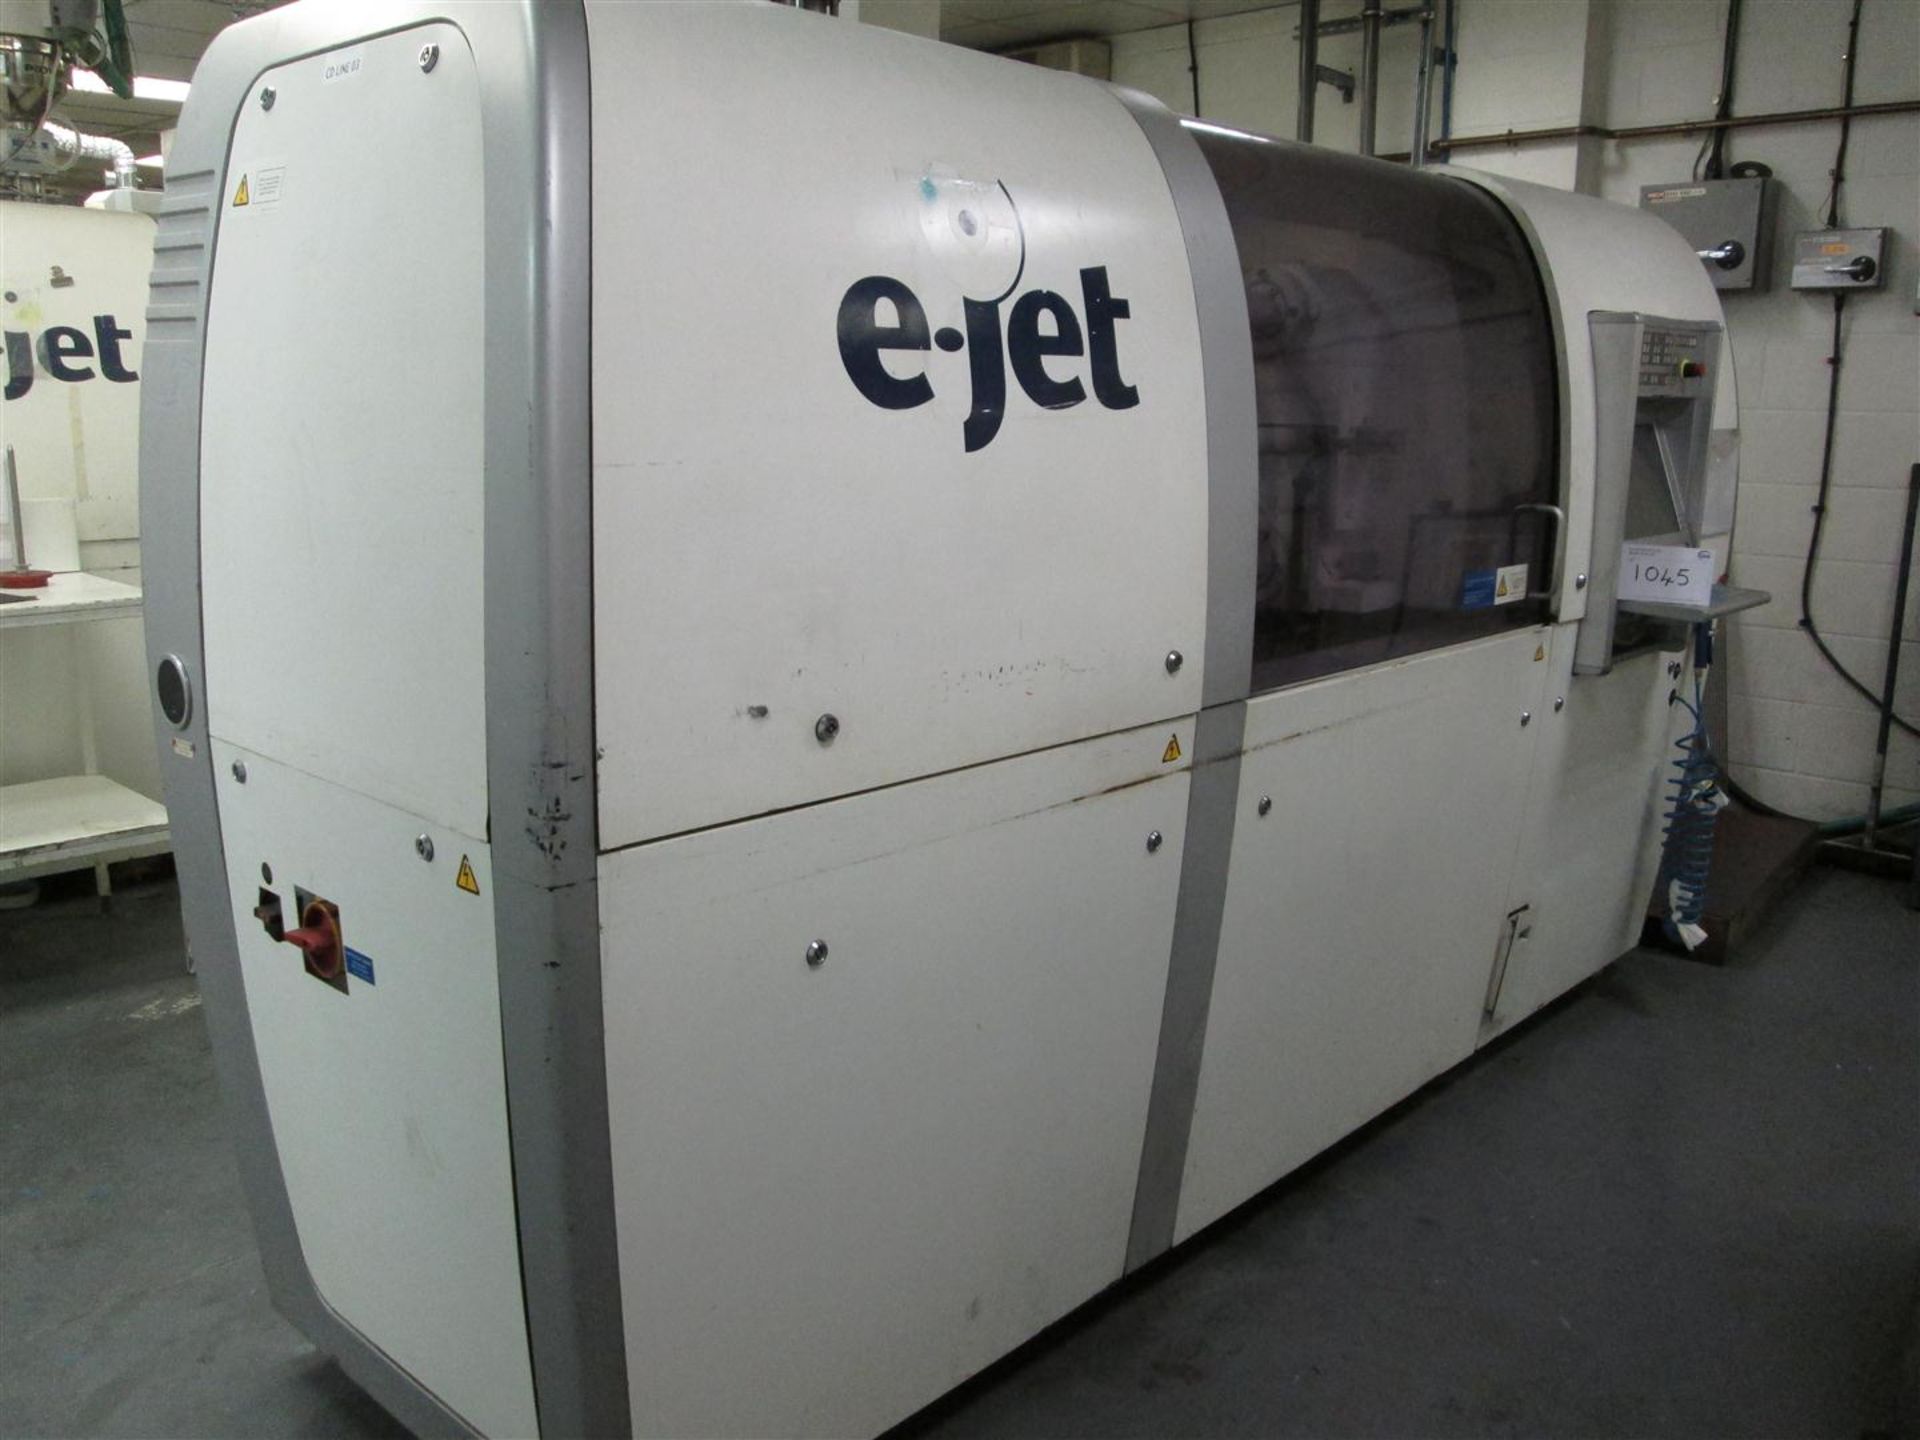 NETSTAL model E-jet unknown injection moulding machine
serial number 2006002001 (2006)

Note: